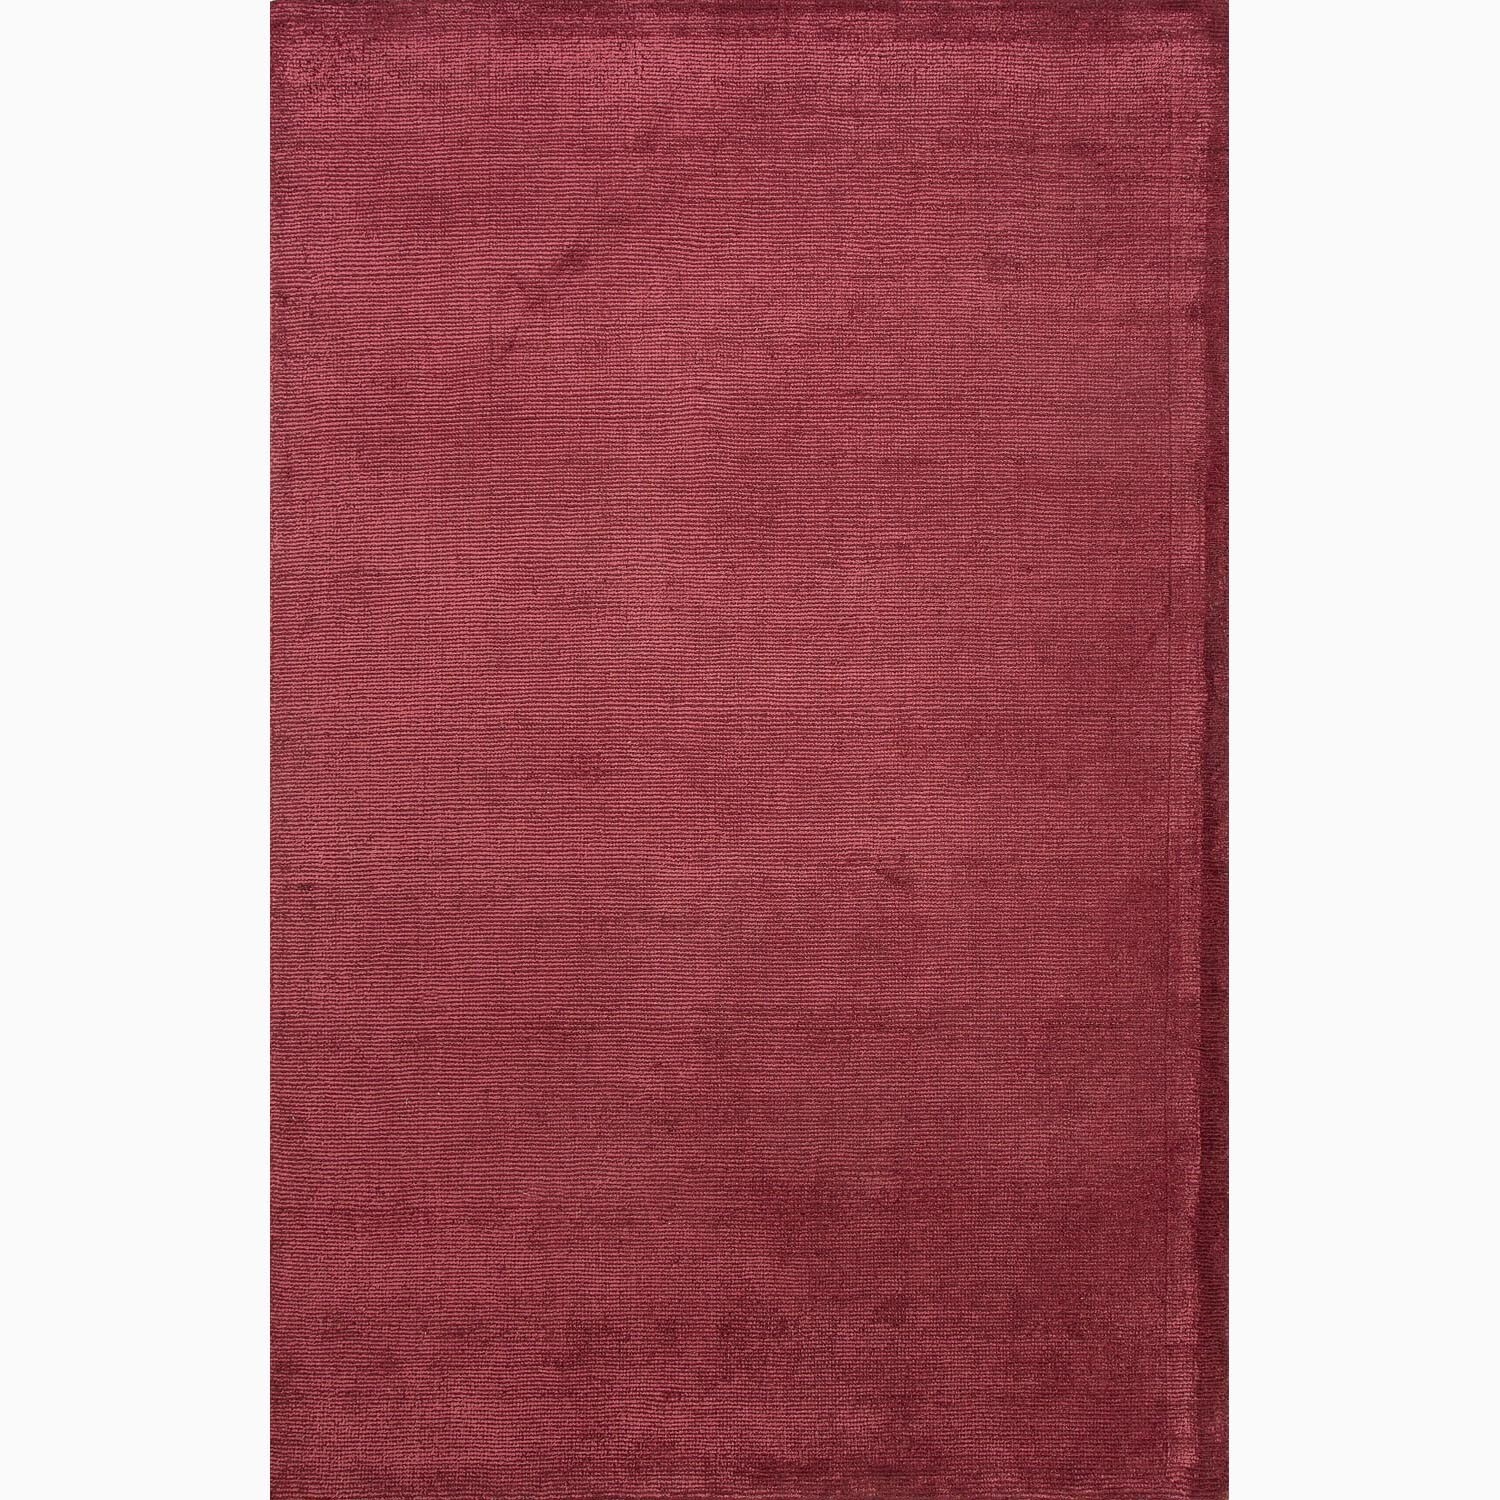 Hand made Solid Pattern Red Wool/ Art Silk Rug (3.6x5.6)